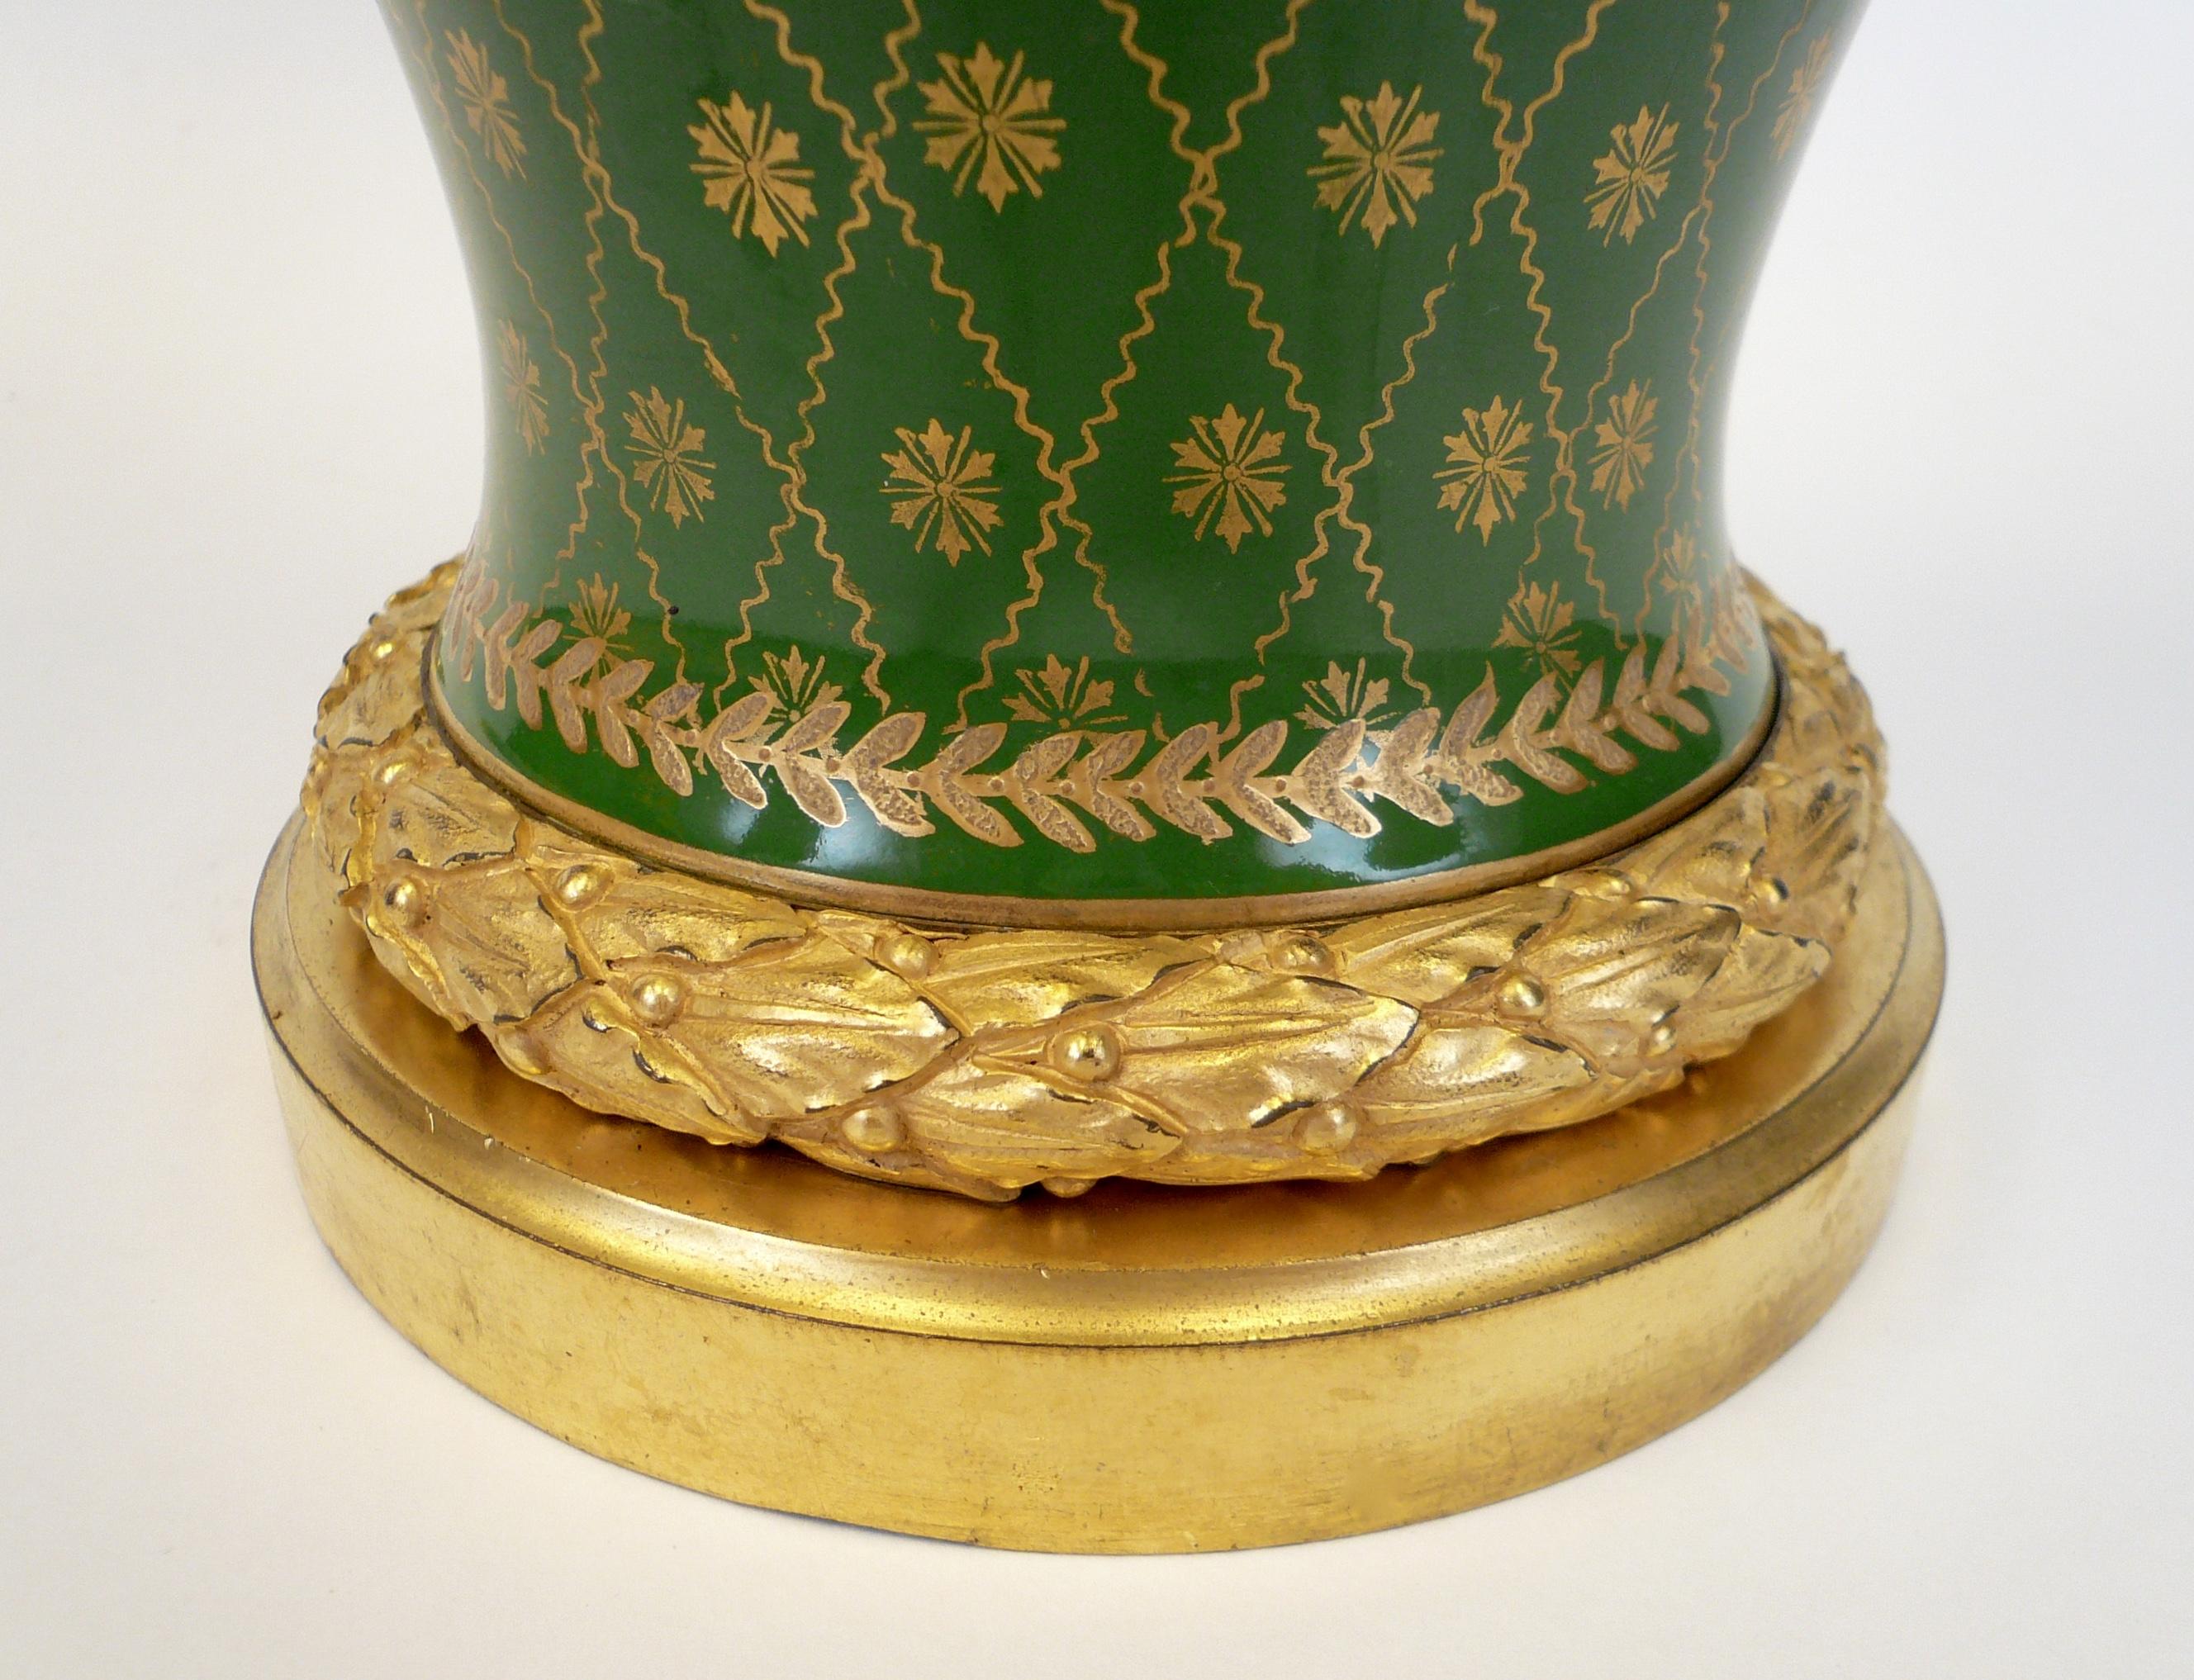 This French porcelain vase features hand painted roses and a gilt decoration. The gilt bronze mounts are by Caldwell and have hand chased details including acanthus leaves. The height of 23 inches includes the original finial.